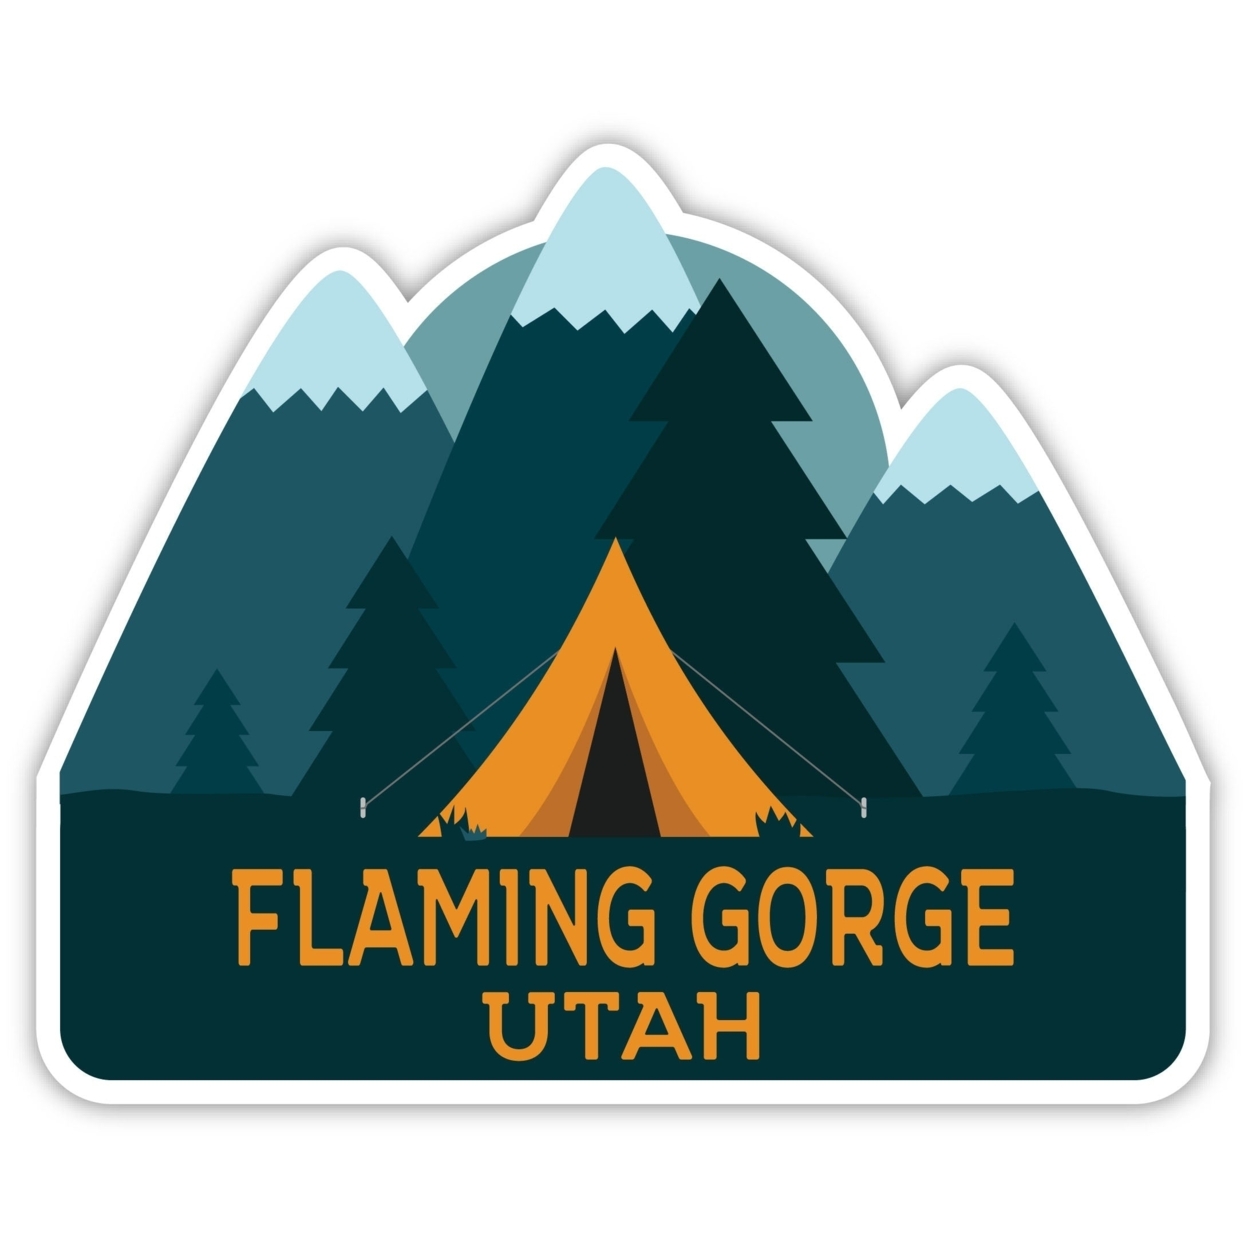 Flaming Gorge Utah Souvenir Decorative Stickers (Choose Theme And Size) - 4-Pack, 10-Inch, Adventures Awaits